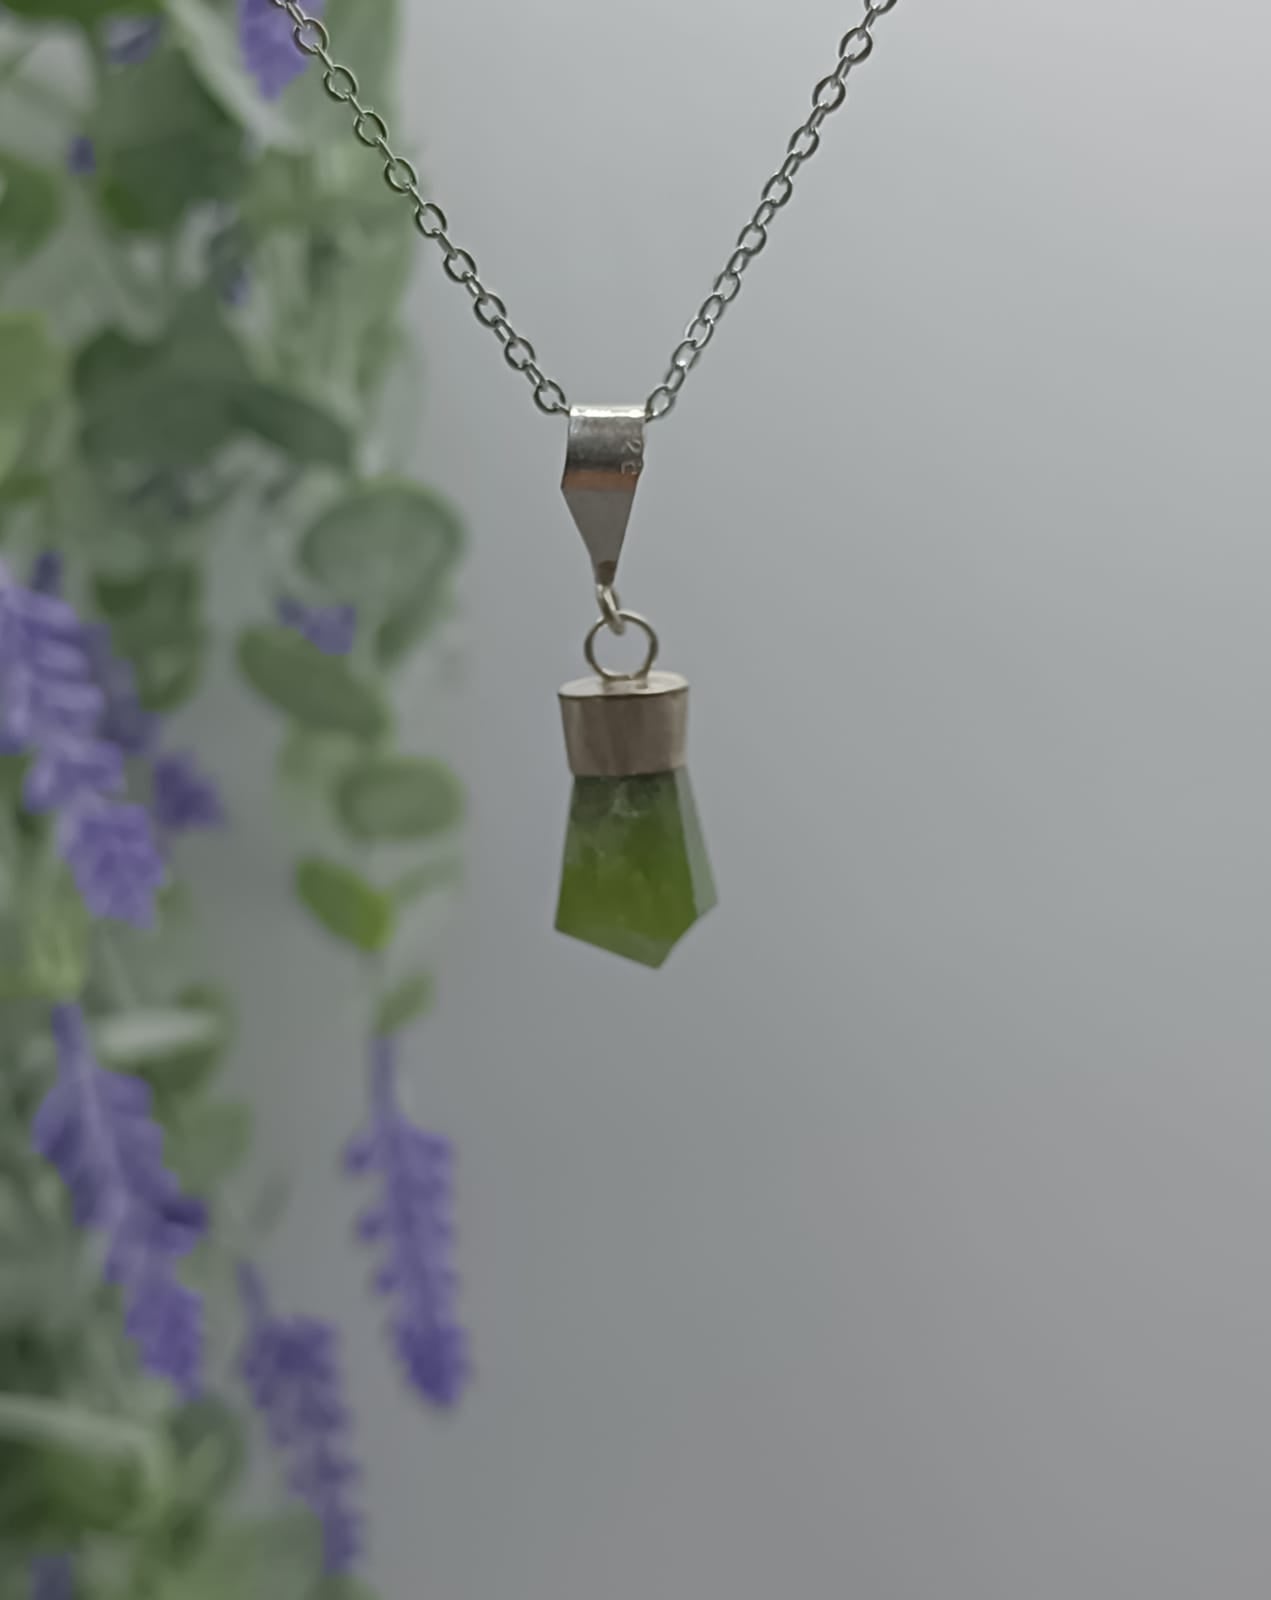 Peridot 925 Sterling Silver Pendant (Chain included)
